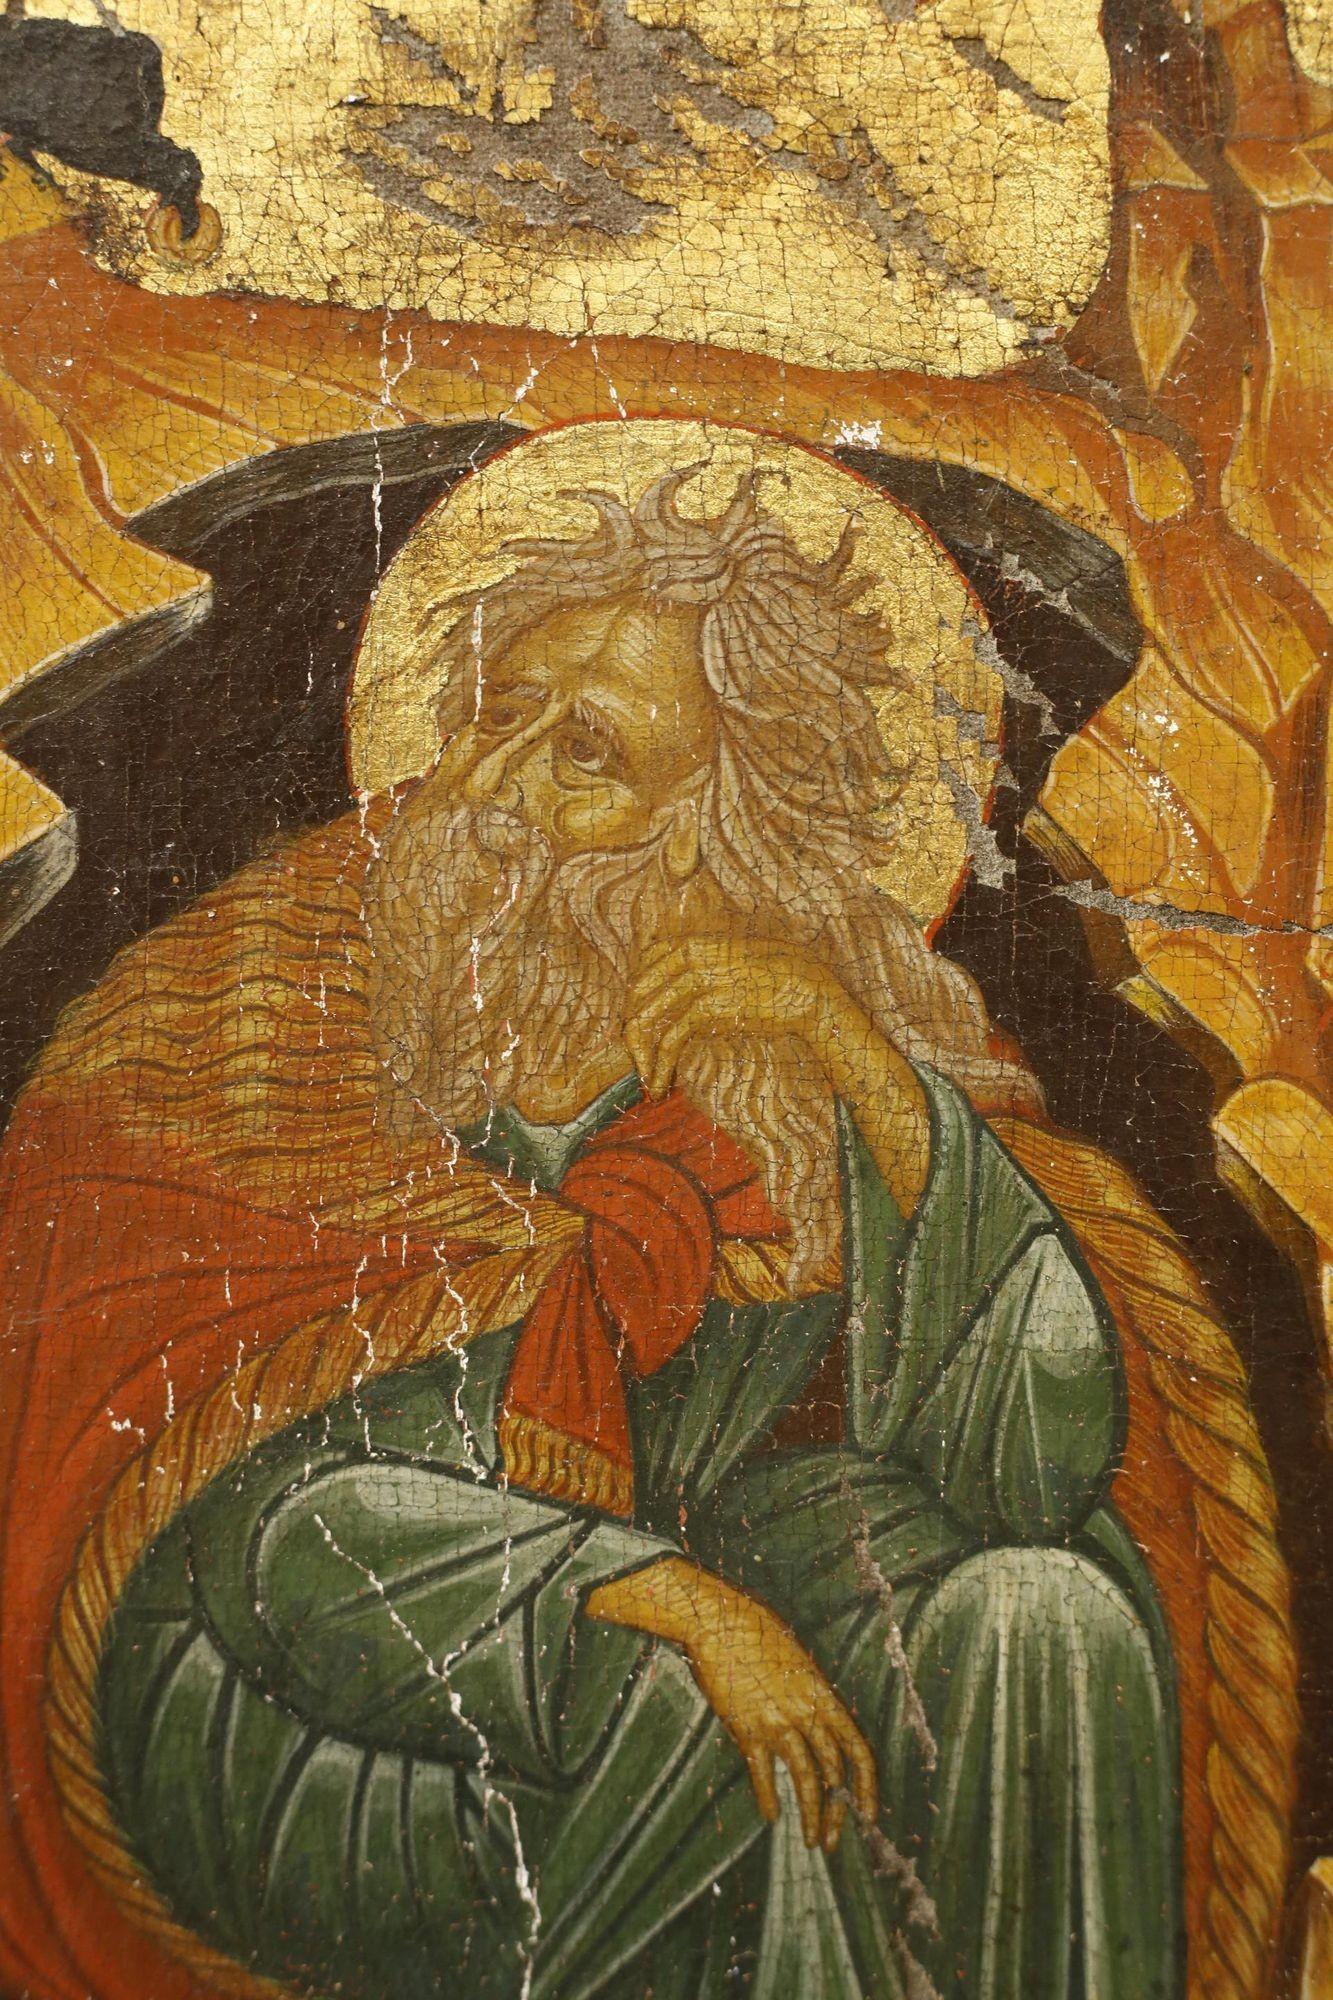 This is a very nicely painted Greek orthodox icon depicting a man on the floor in green gown. It is well worn and has a very attractive appearance. Great quality to the work and the gnarled chunk of wood it is on is wonderful. Age is hard to judge